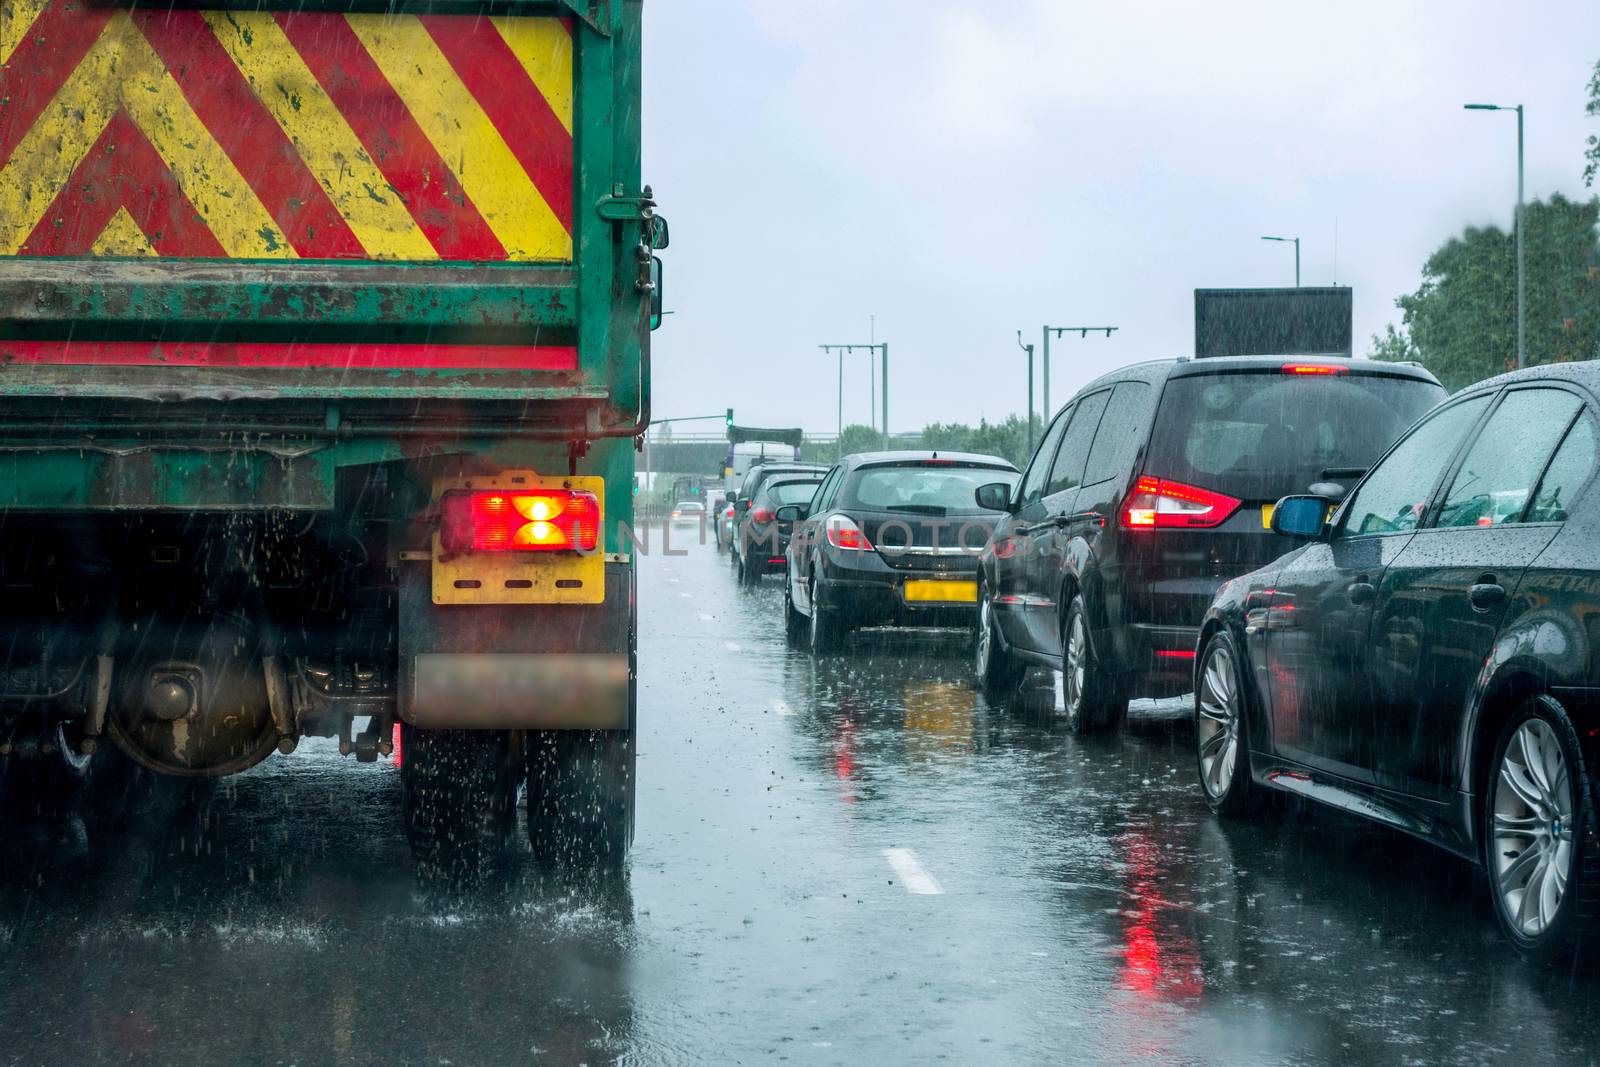 An image of traffic on a London road in heavy rain.